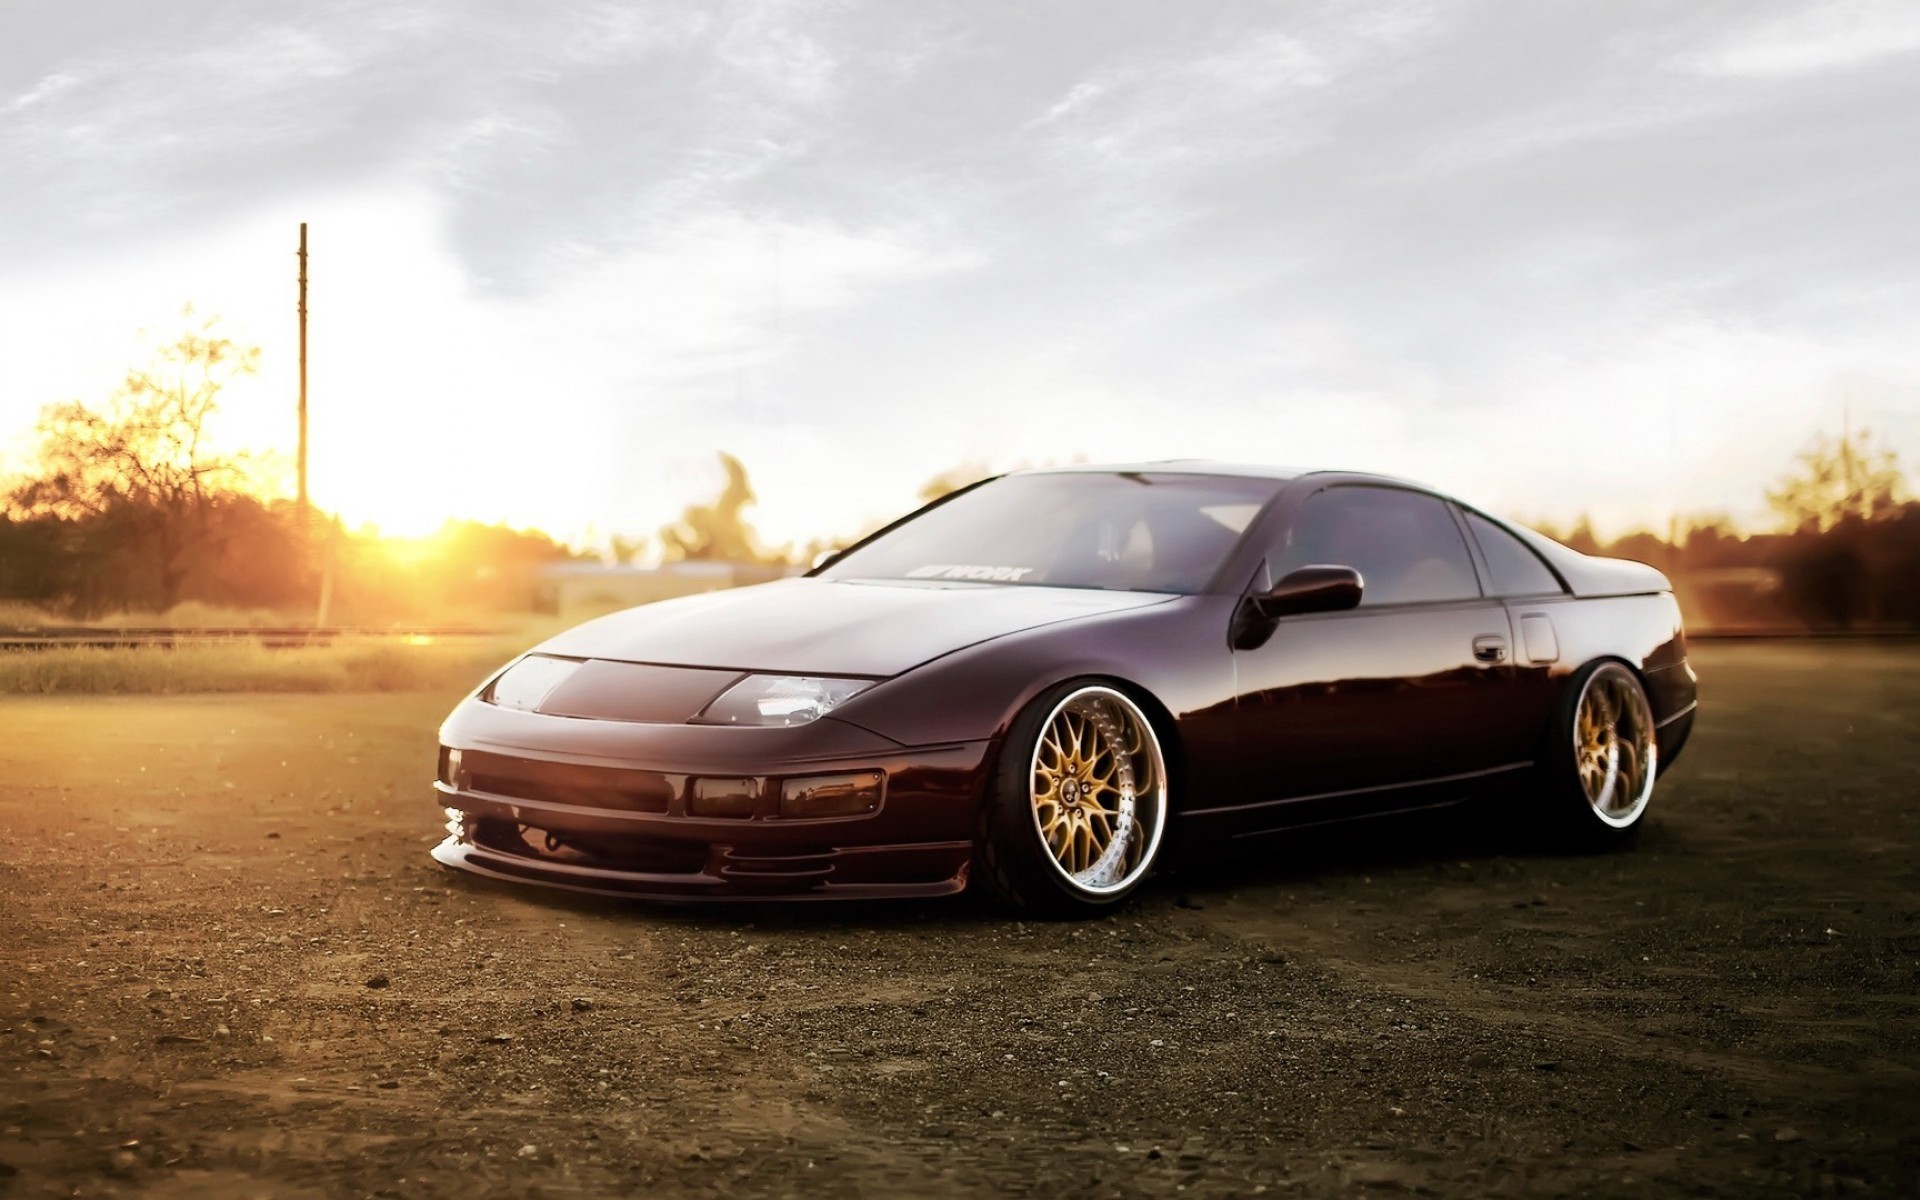 JDM, Stance, Nissan Wallpapers HD / Desktop and Mobile Backgrounds